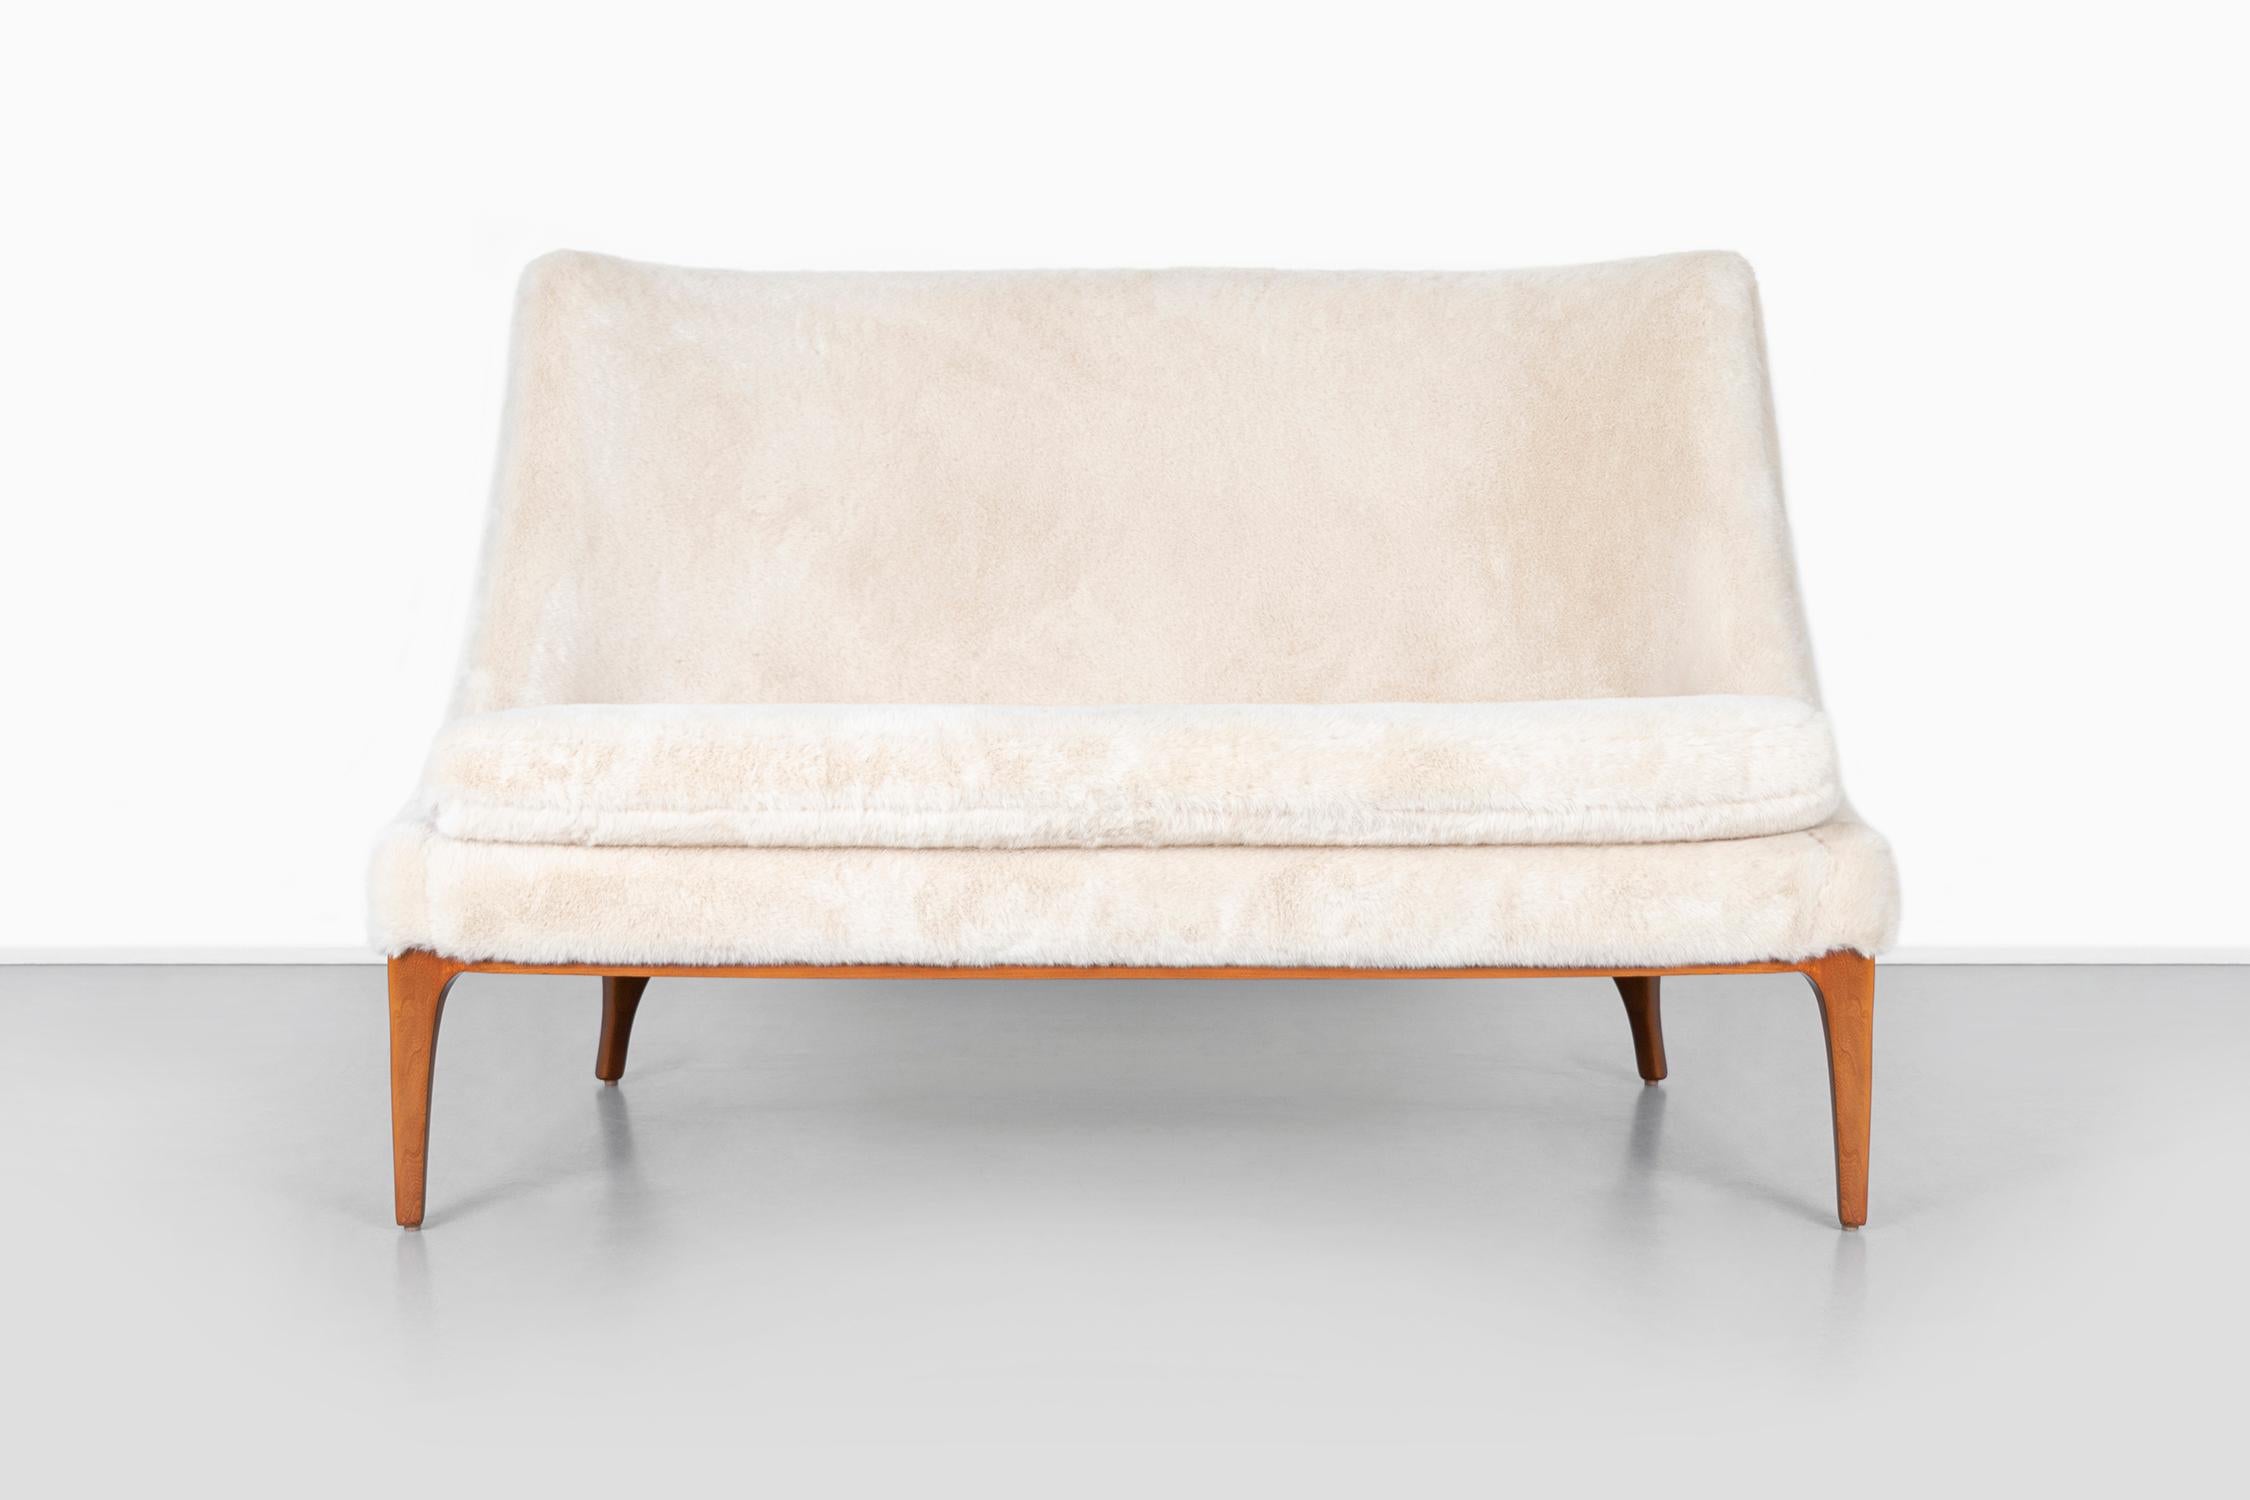 Lawrence Peabody Settee Reupholstered in Faux Fur For Sale 2